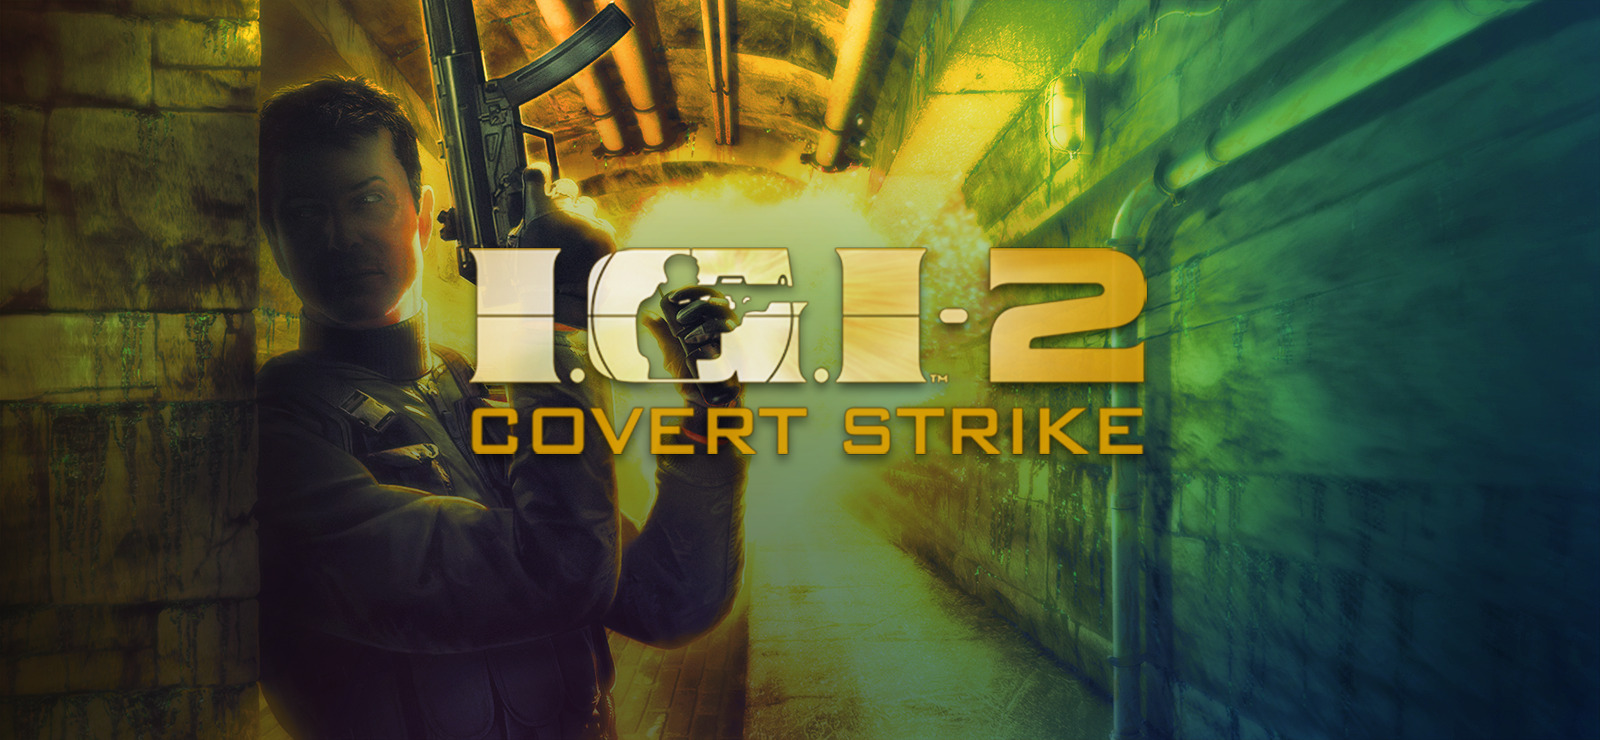 Project I.G.I 2 COVER STRIKE Game for Android - Download